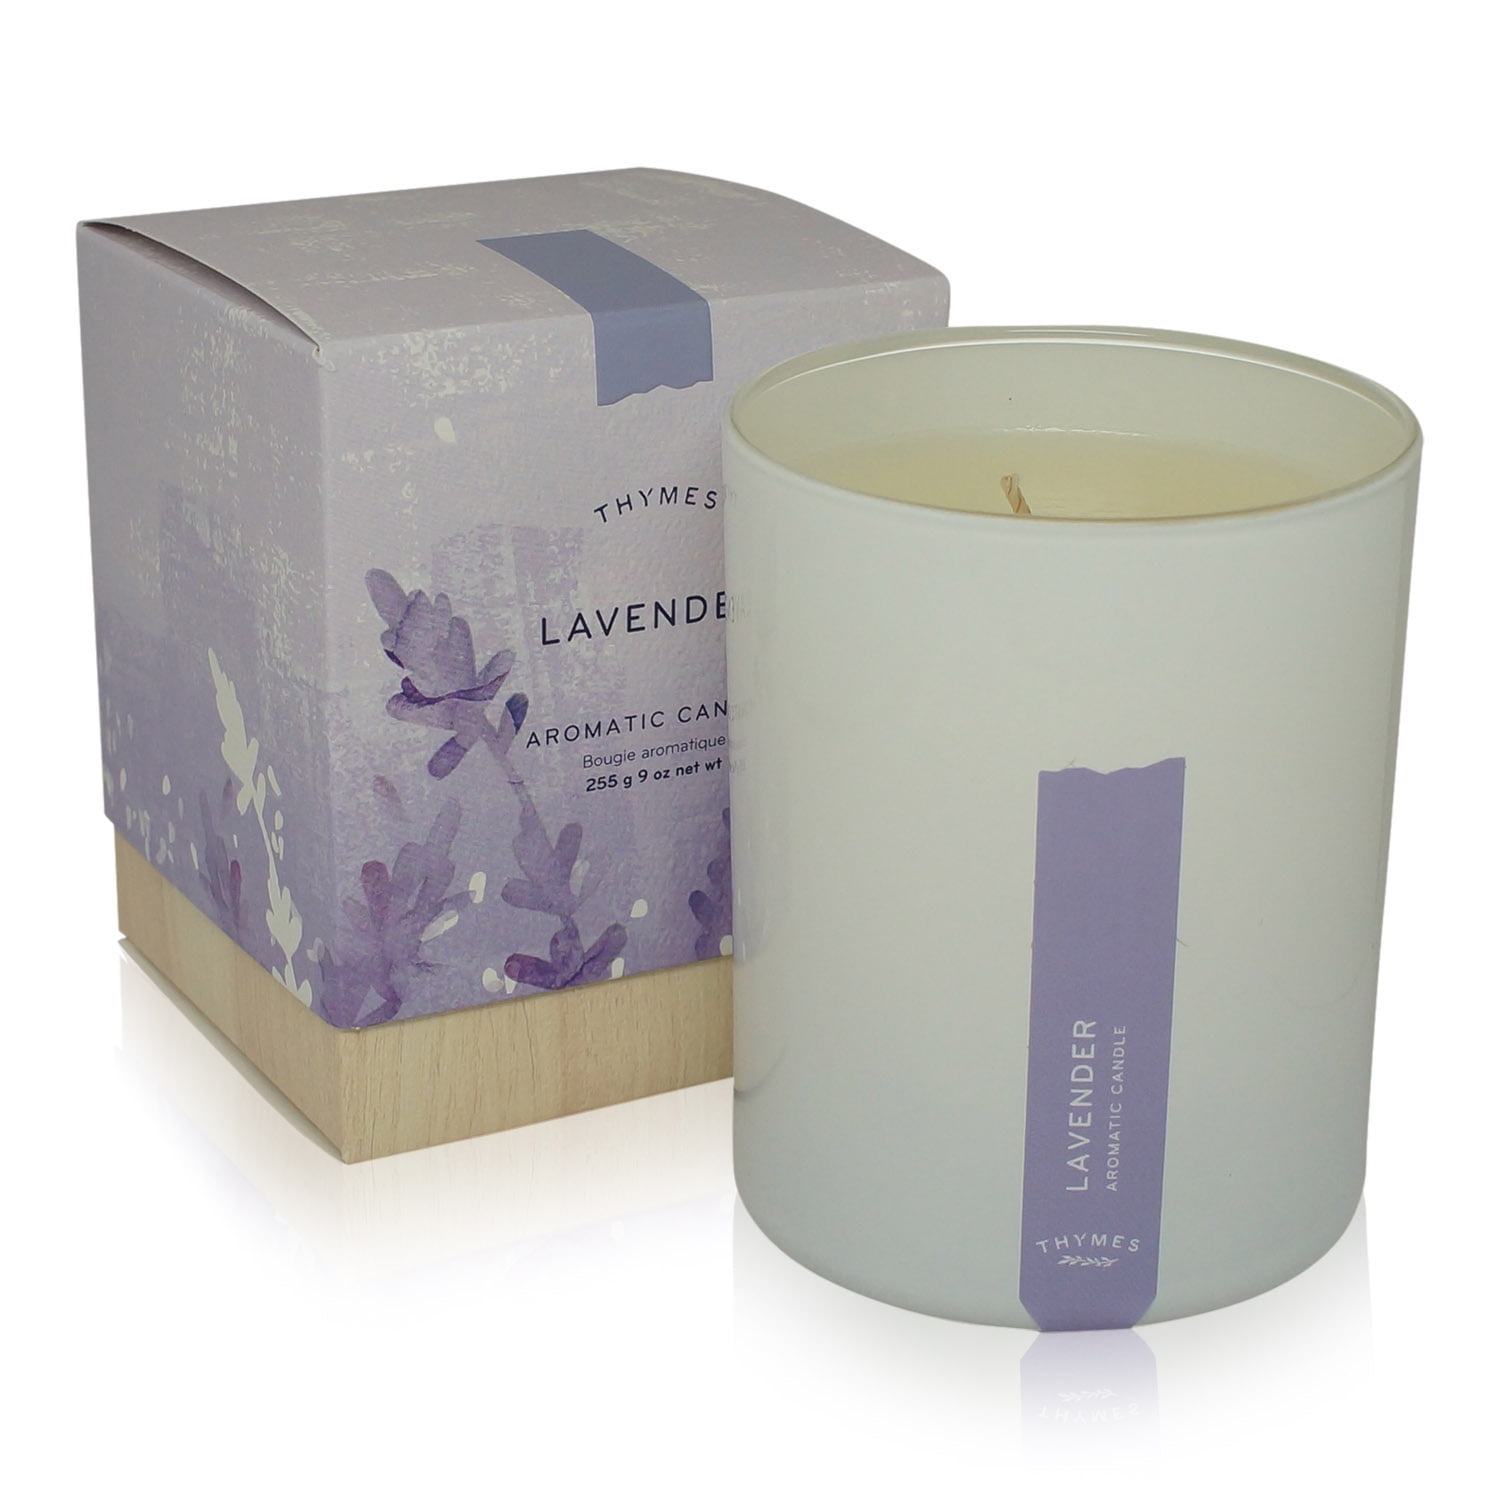 Thymes Lavender Aromatic Candle 9 oz 